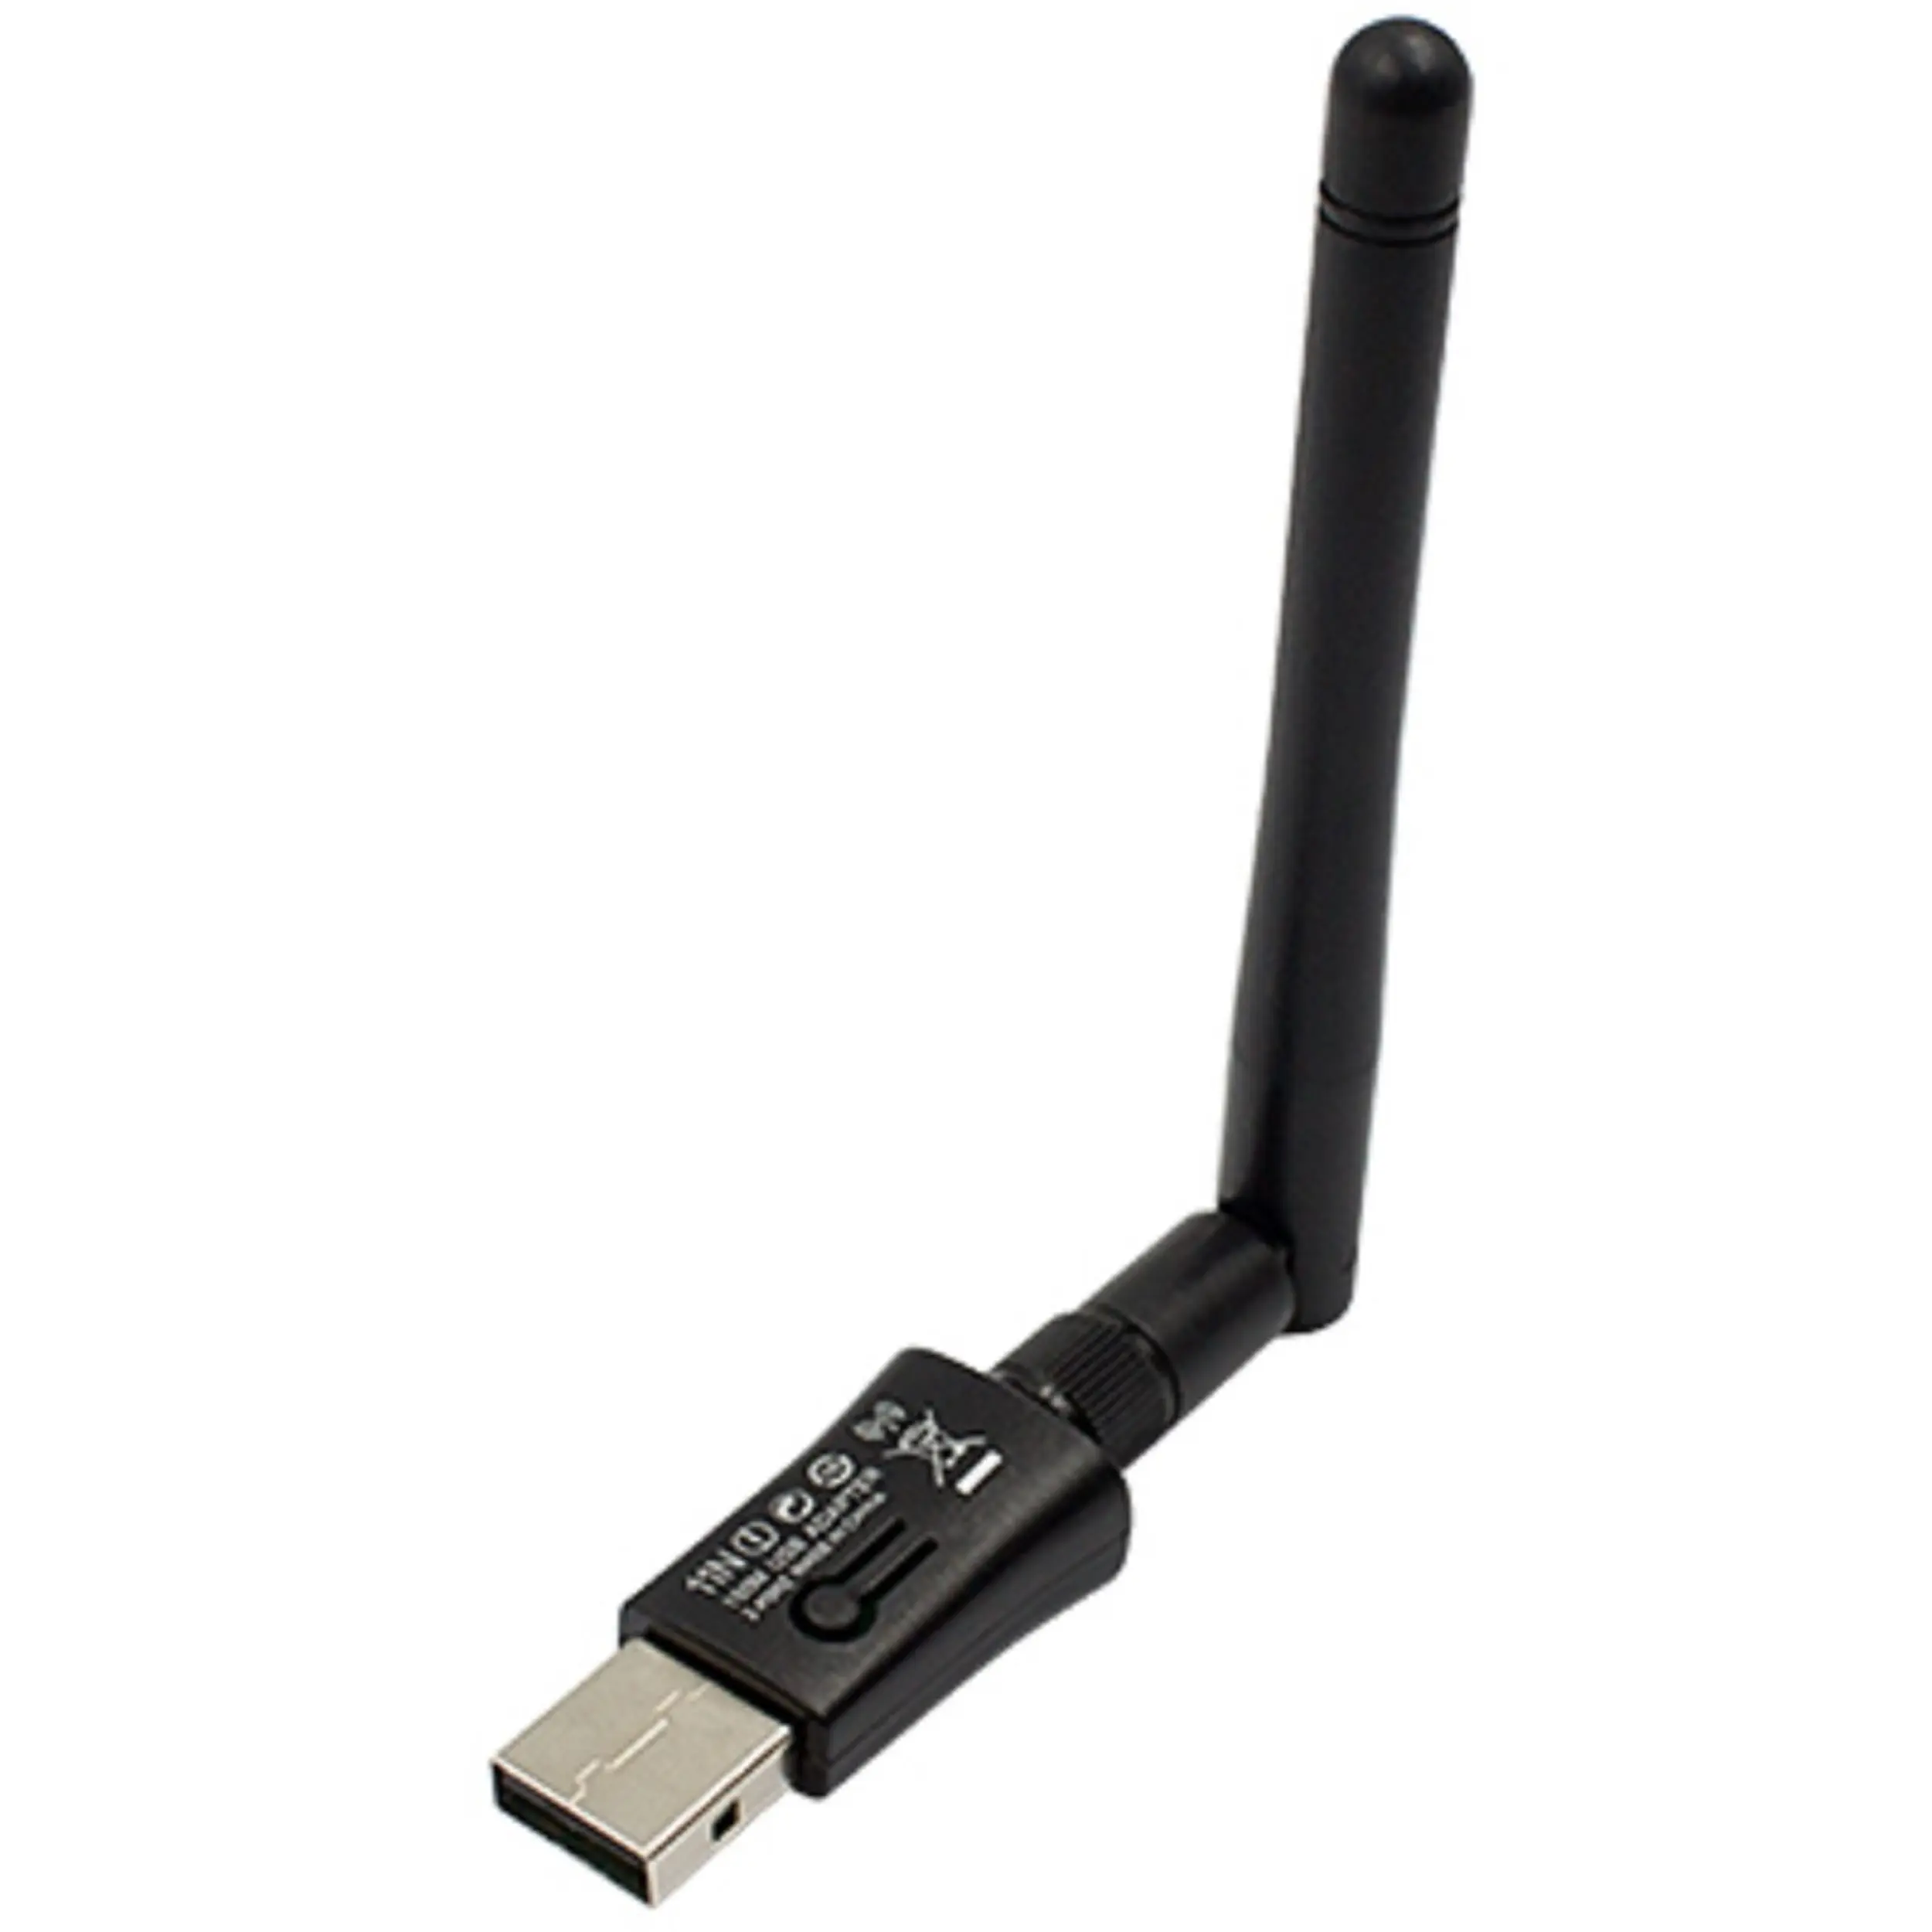 TP Link MTK 7601 USB Wifi Adapter 150Mbps wireless dongle with External Antenna Supports XP VISTA WIN7